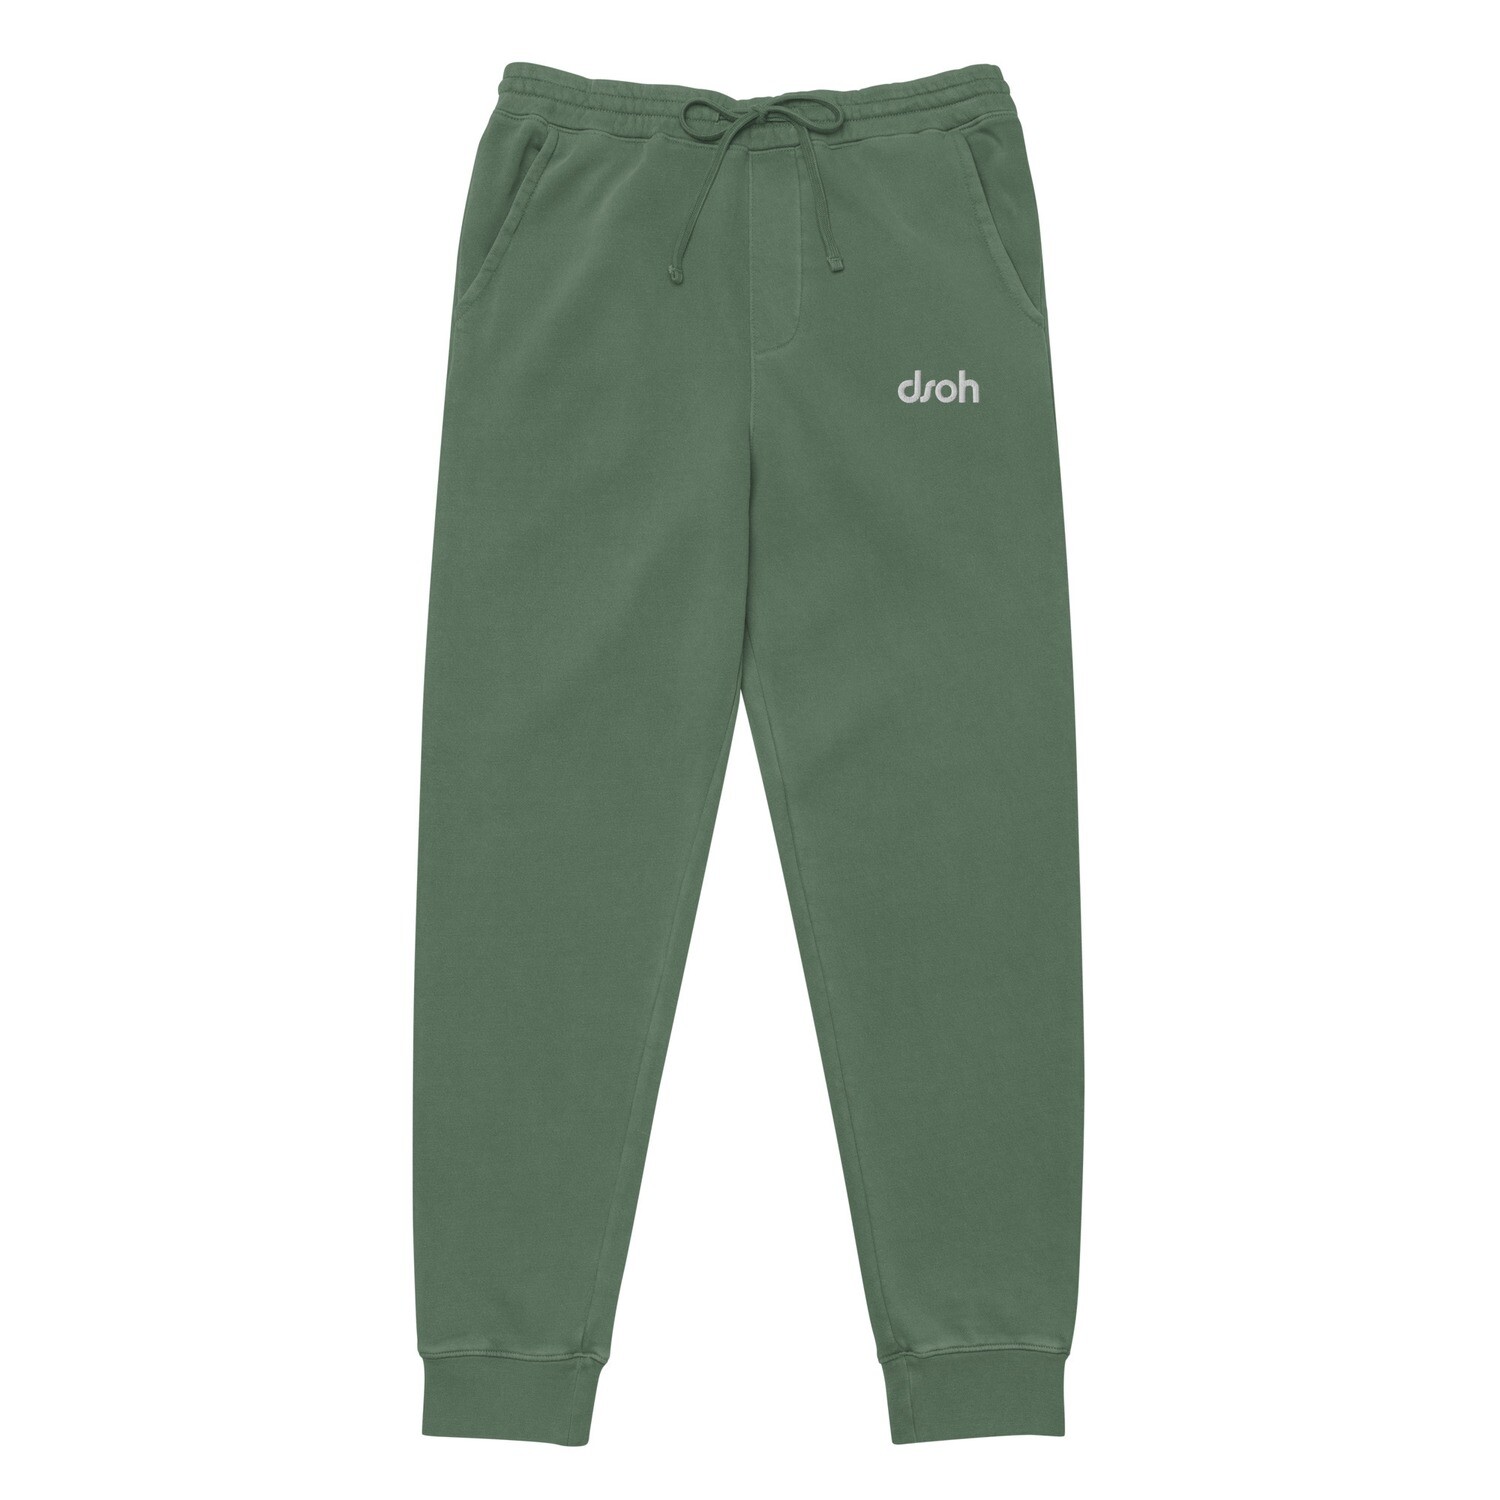 PIGMENT-DYED LOGO SWEATPANTS by DSOH